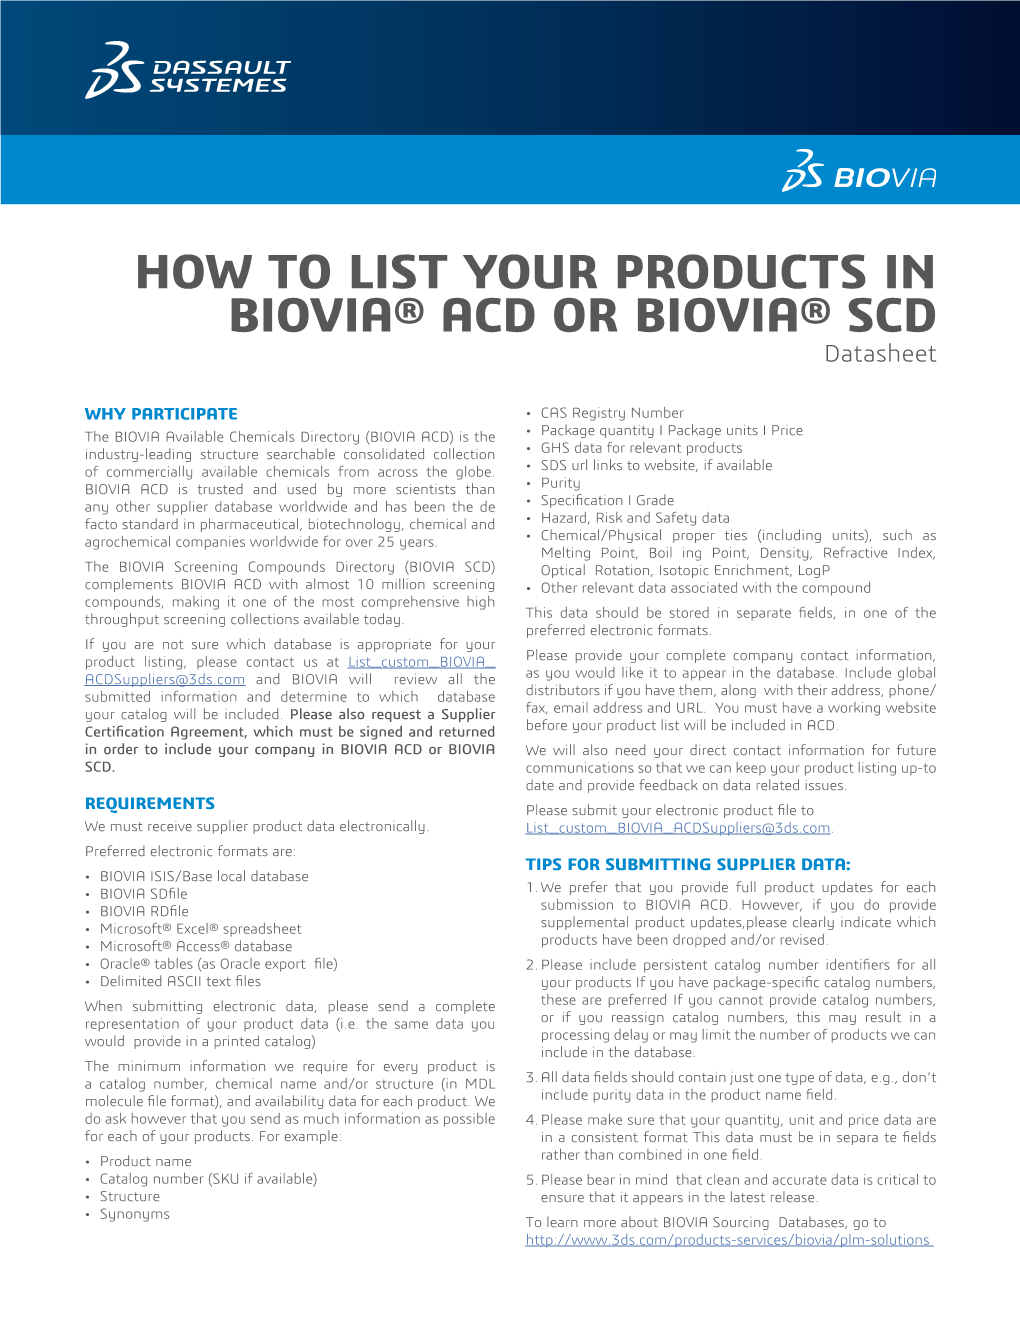 HOW to LIST YOUR PRODUCTS in BIOVIA® ACD OR BIOVIA® SCD Datasheet